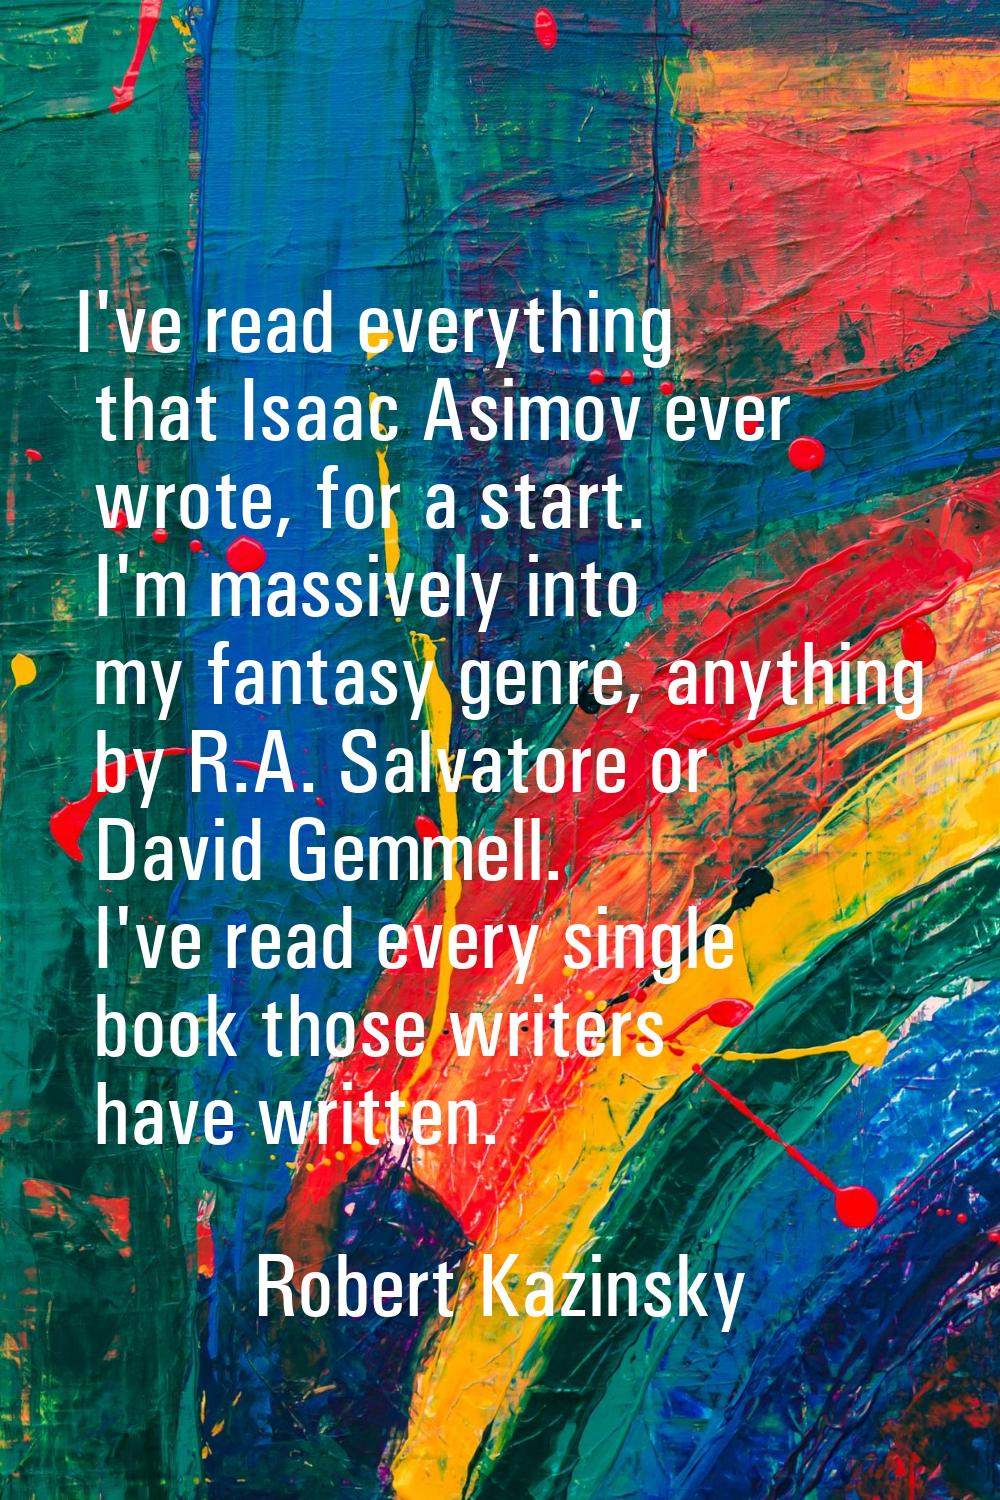 I've read everything that Isaac Asimov ever wrote, for a start. I'm massively into my fantasy genre